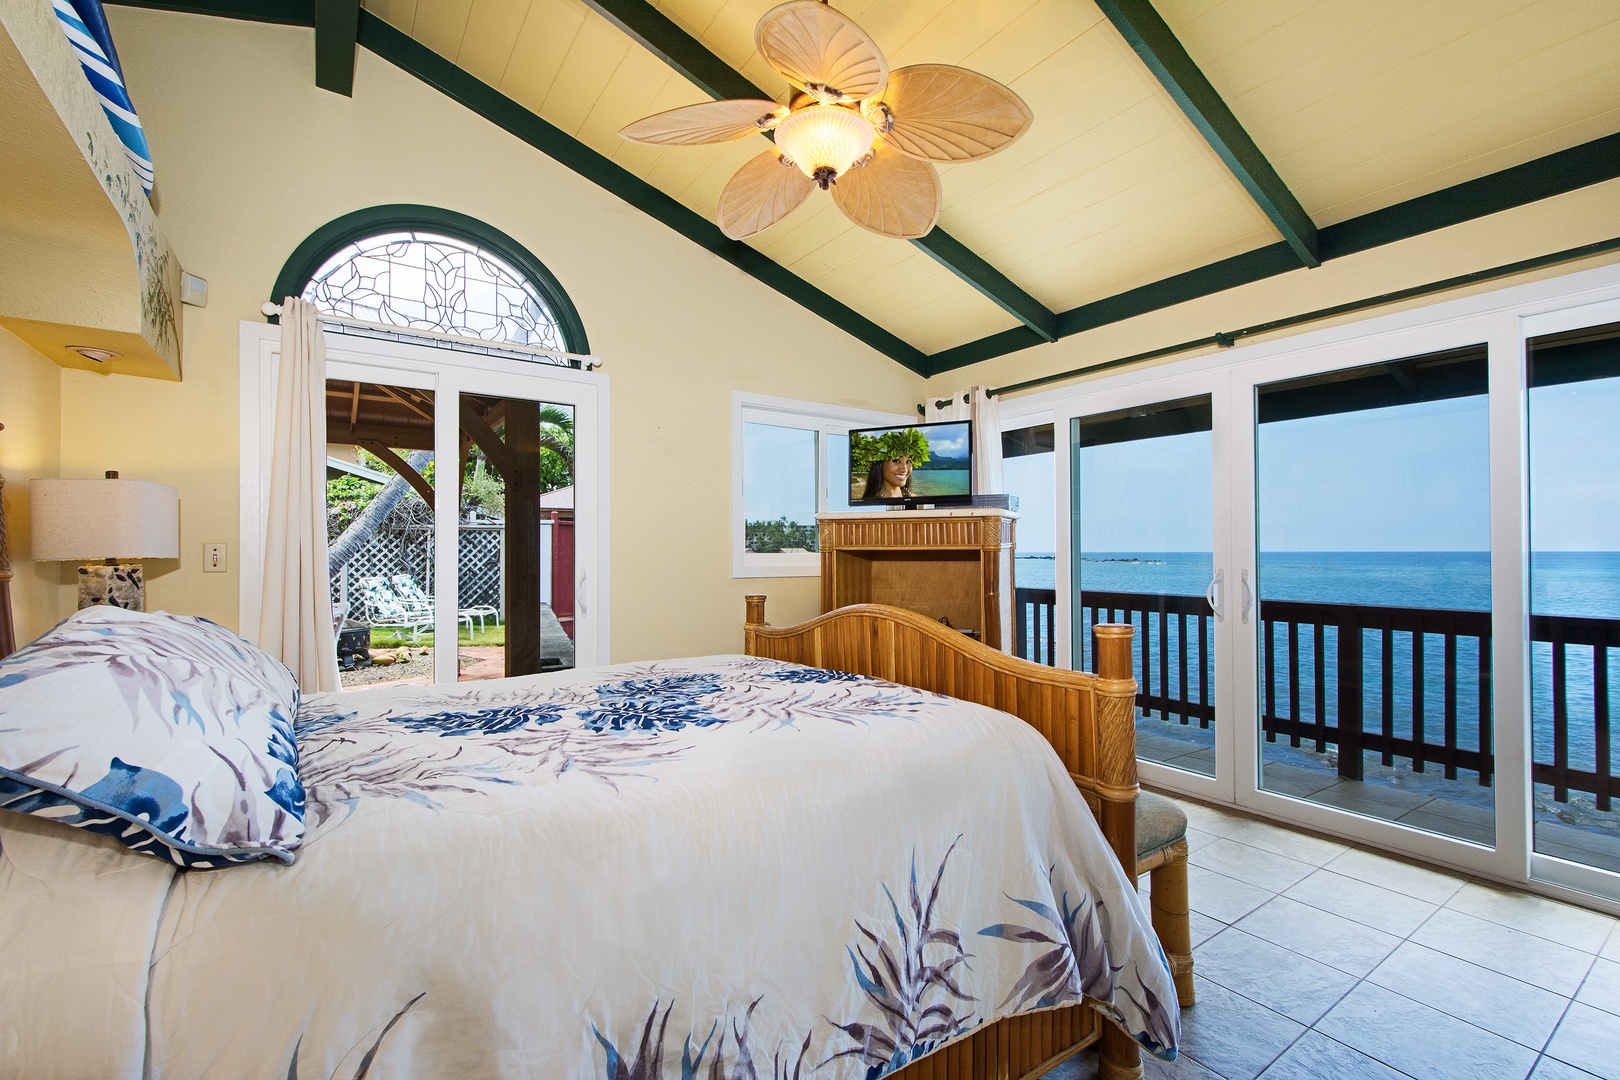 Kailua Kona Vacation Rentals, The Cottage - King sized bed in the bedroom with gorgeous Ocean views!